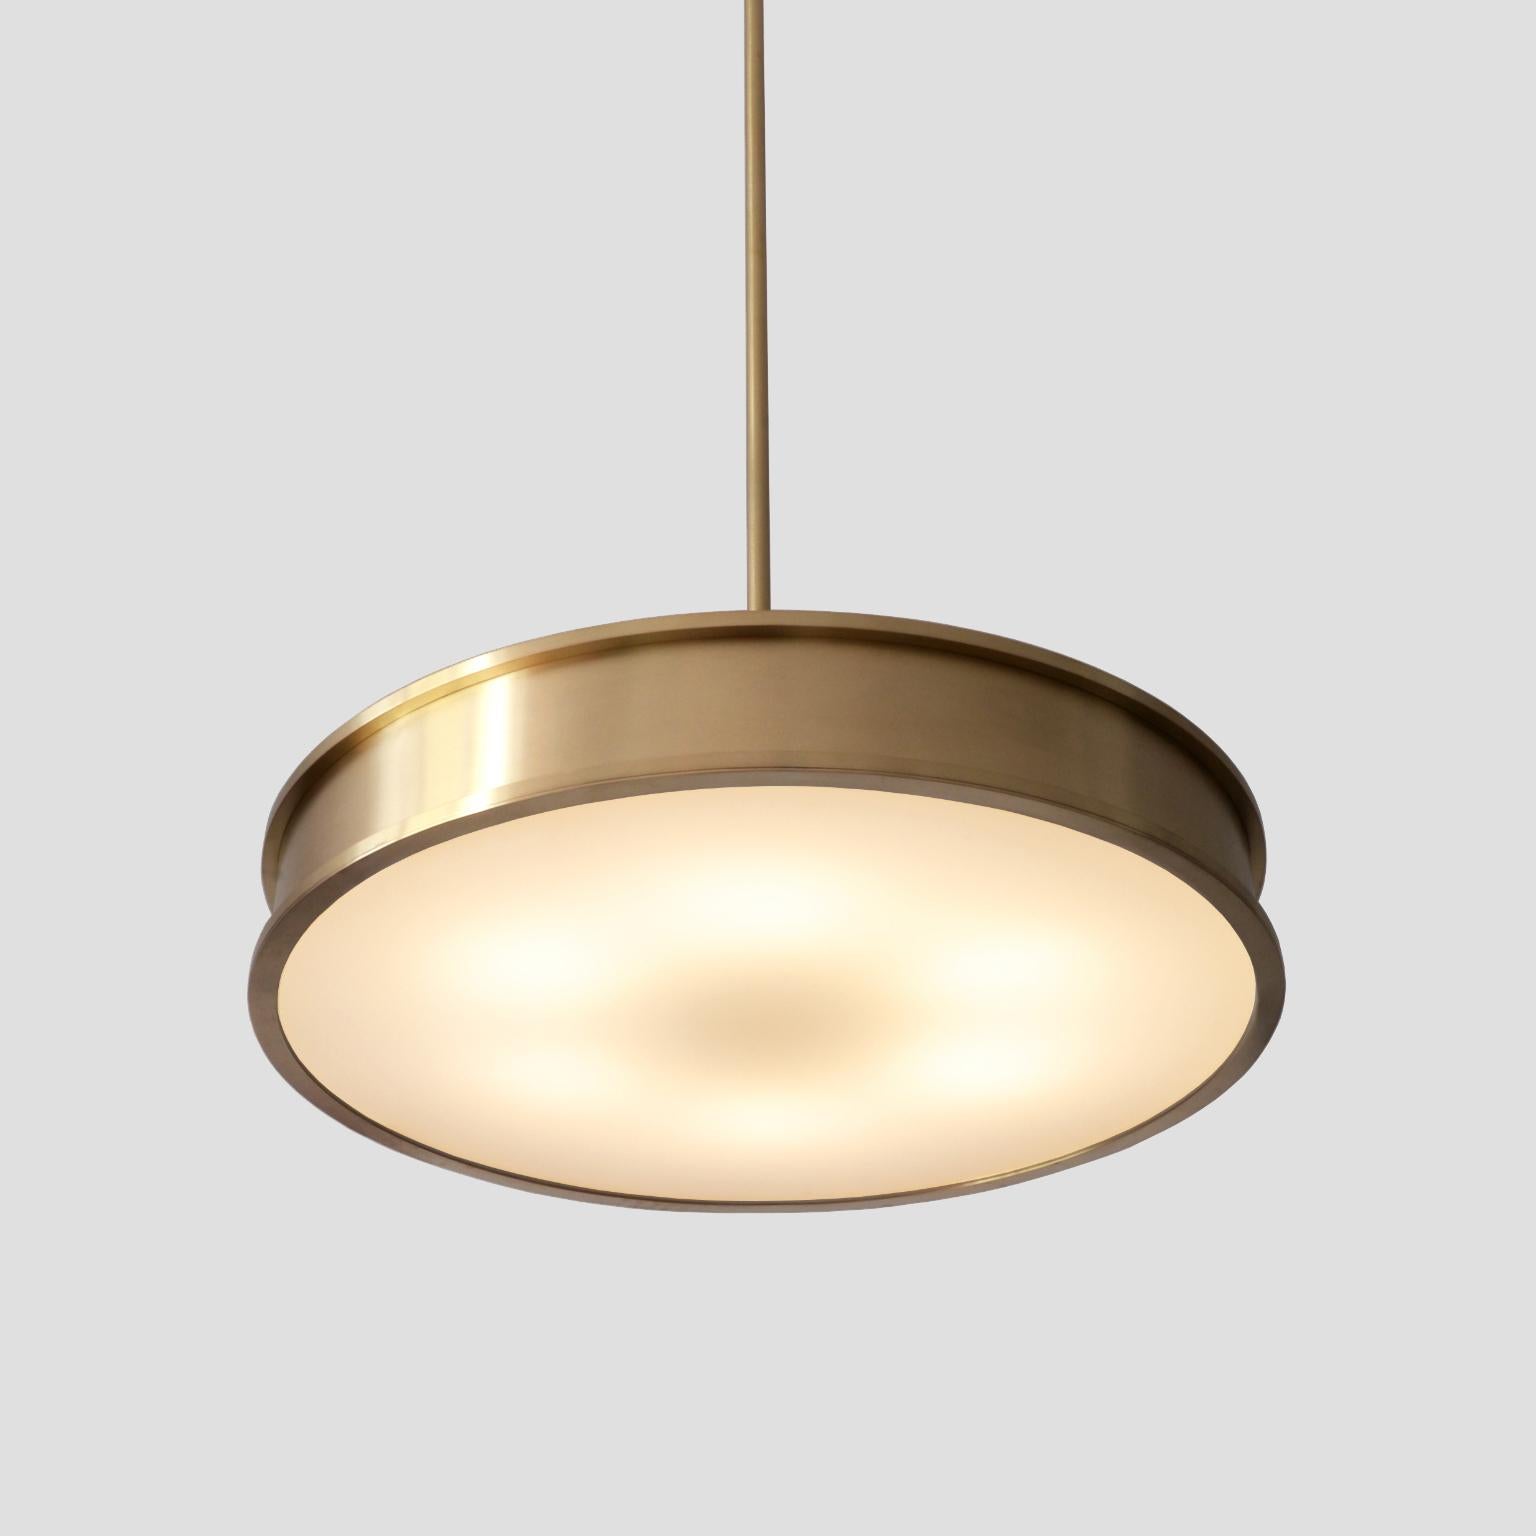 The 'Diskus' modernist pendant light has a pure classical timeless form and is manufactured in brushed brass and opal glass. The light is provided with 6 E27 sockets and disponible on request in different dimensions and amounts.